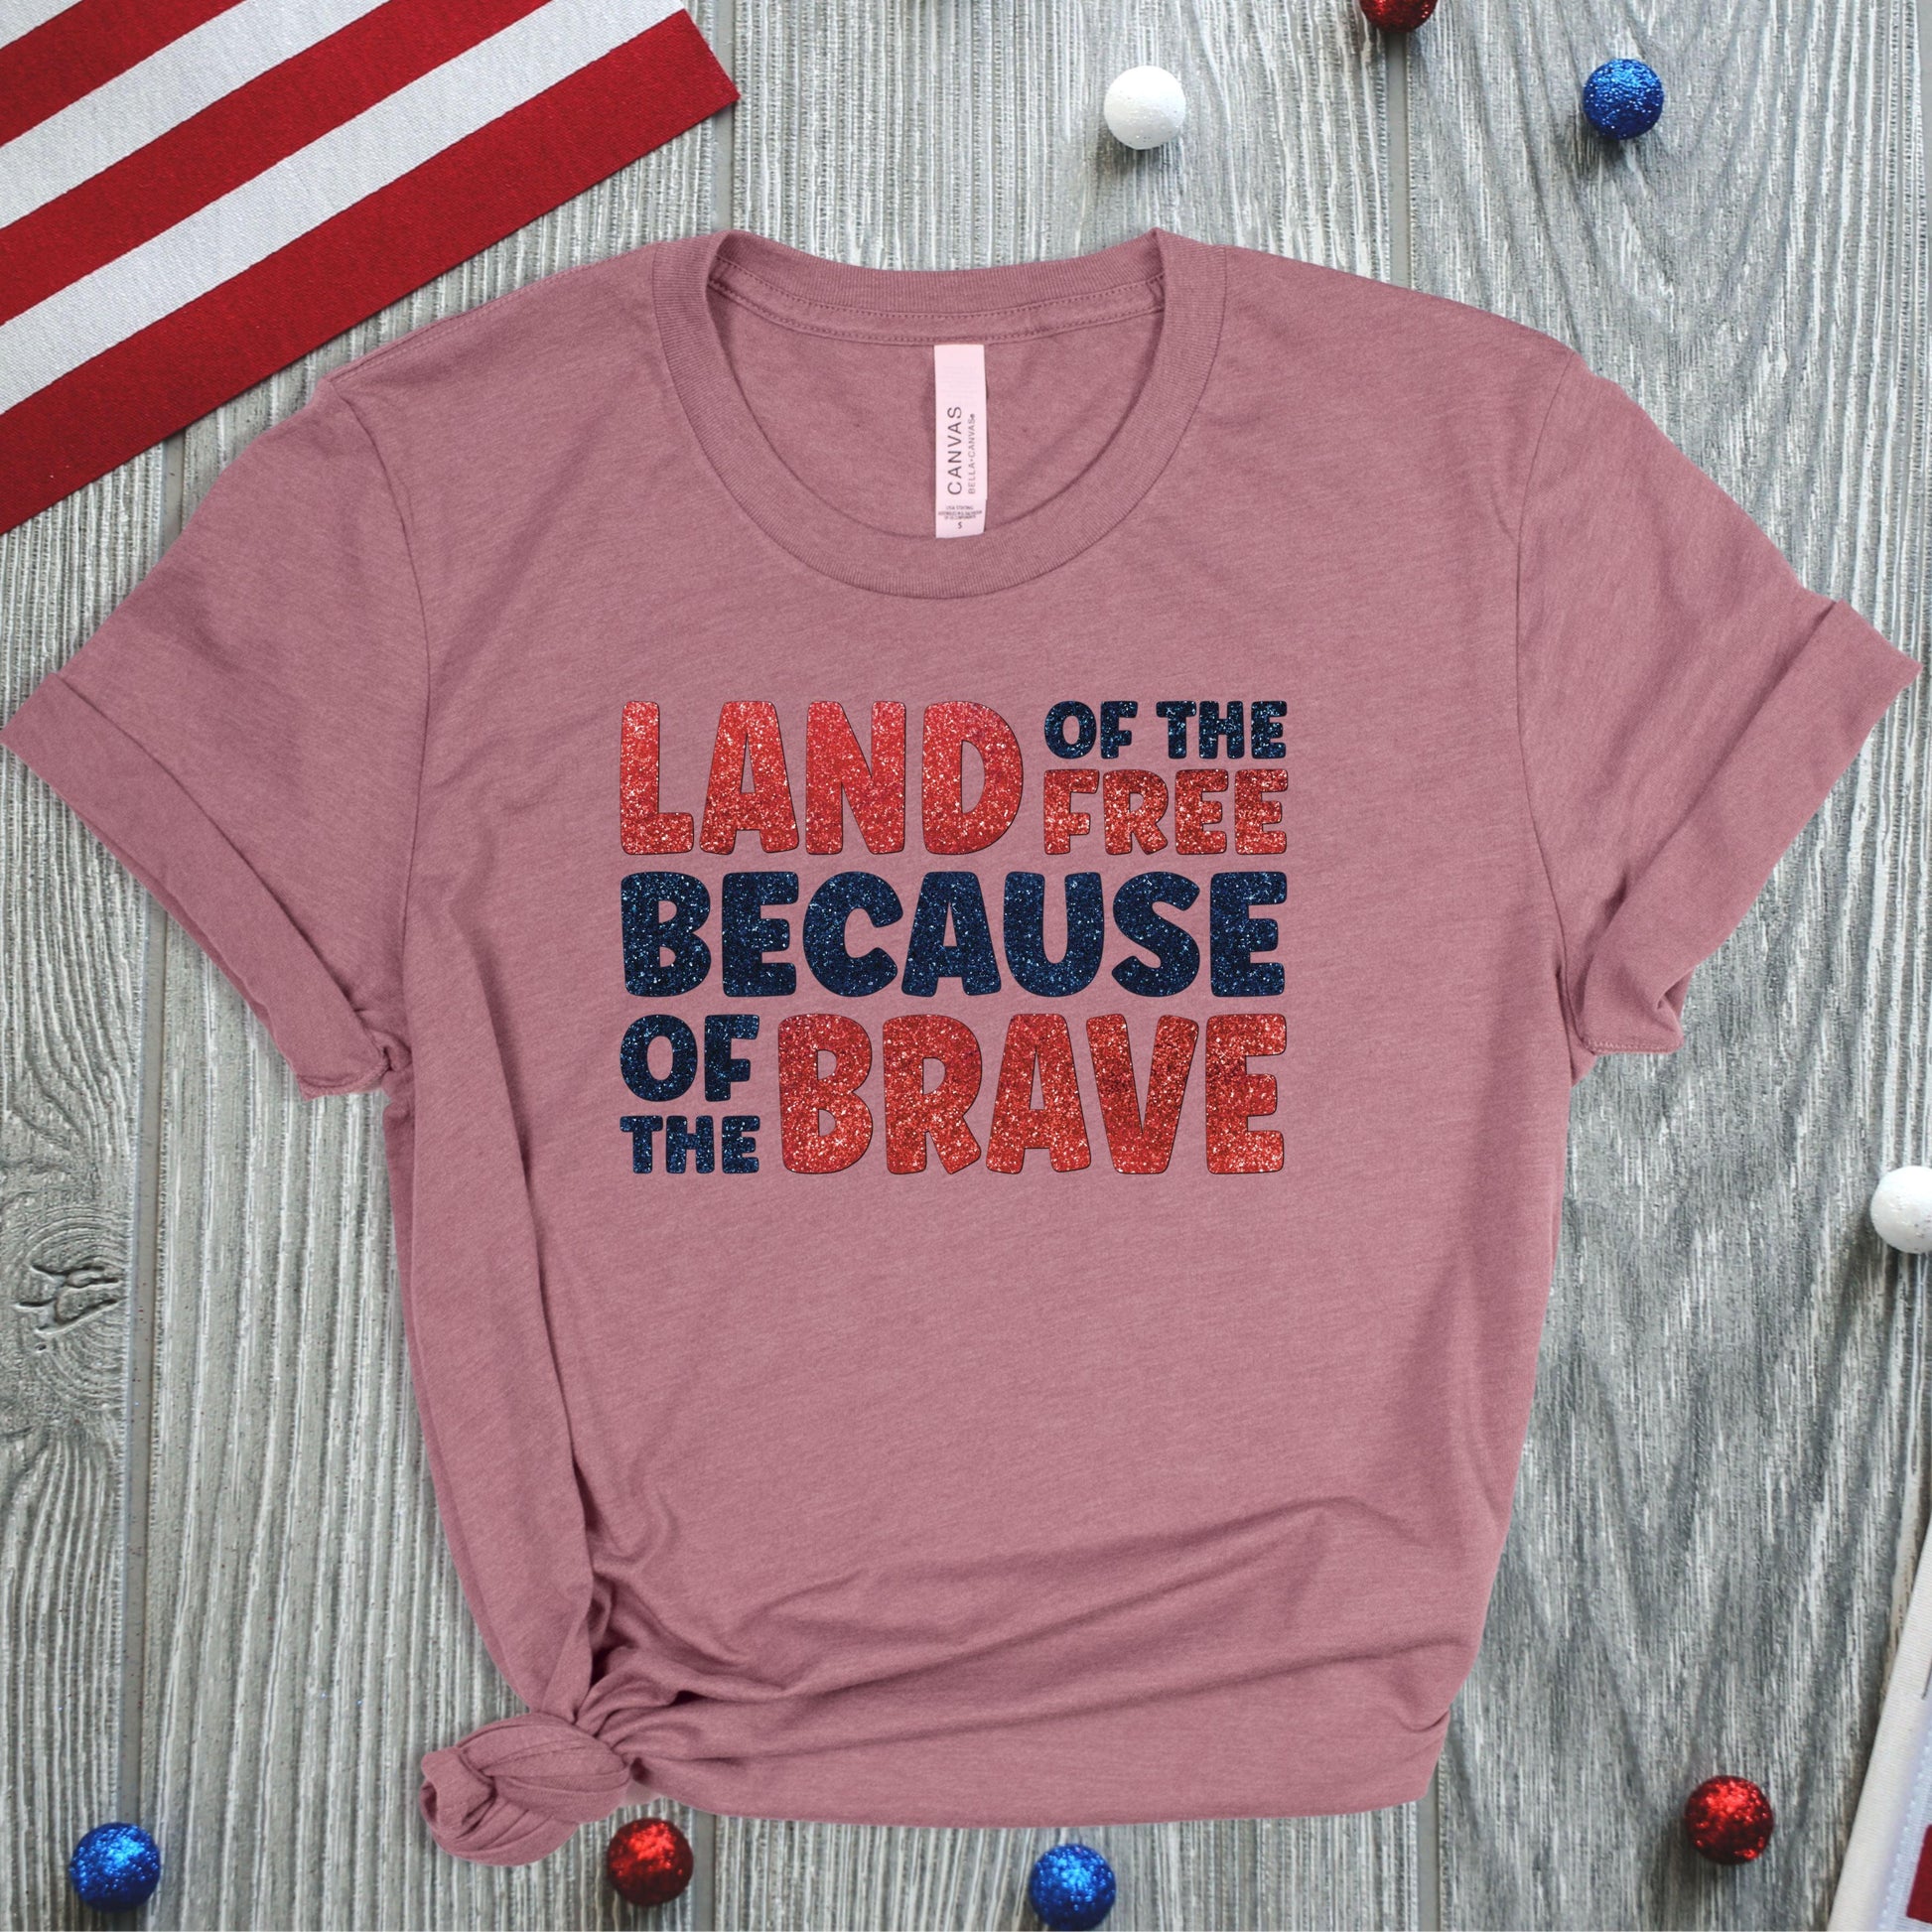 Land Of The Free Because Of The Brave Patriotic Women’s Tee - JT Footprint Apparel